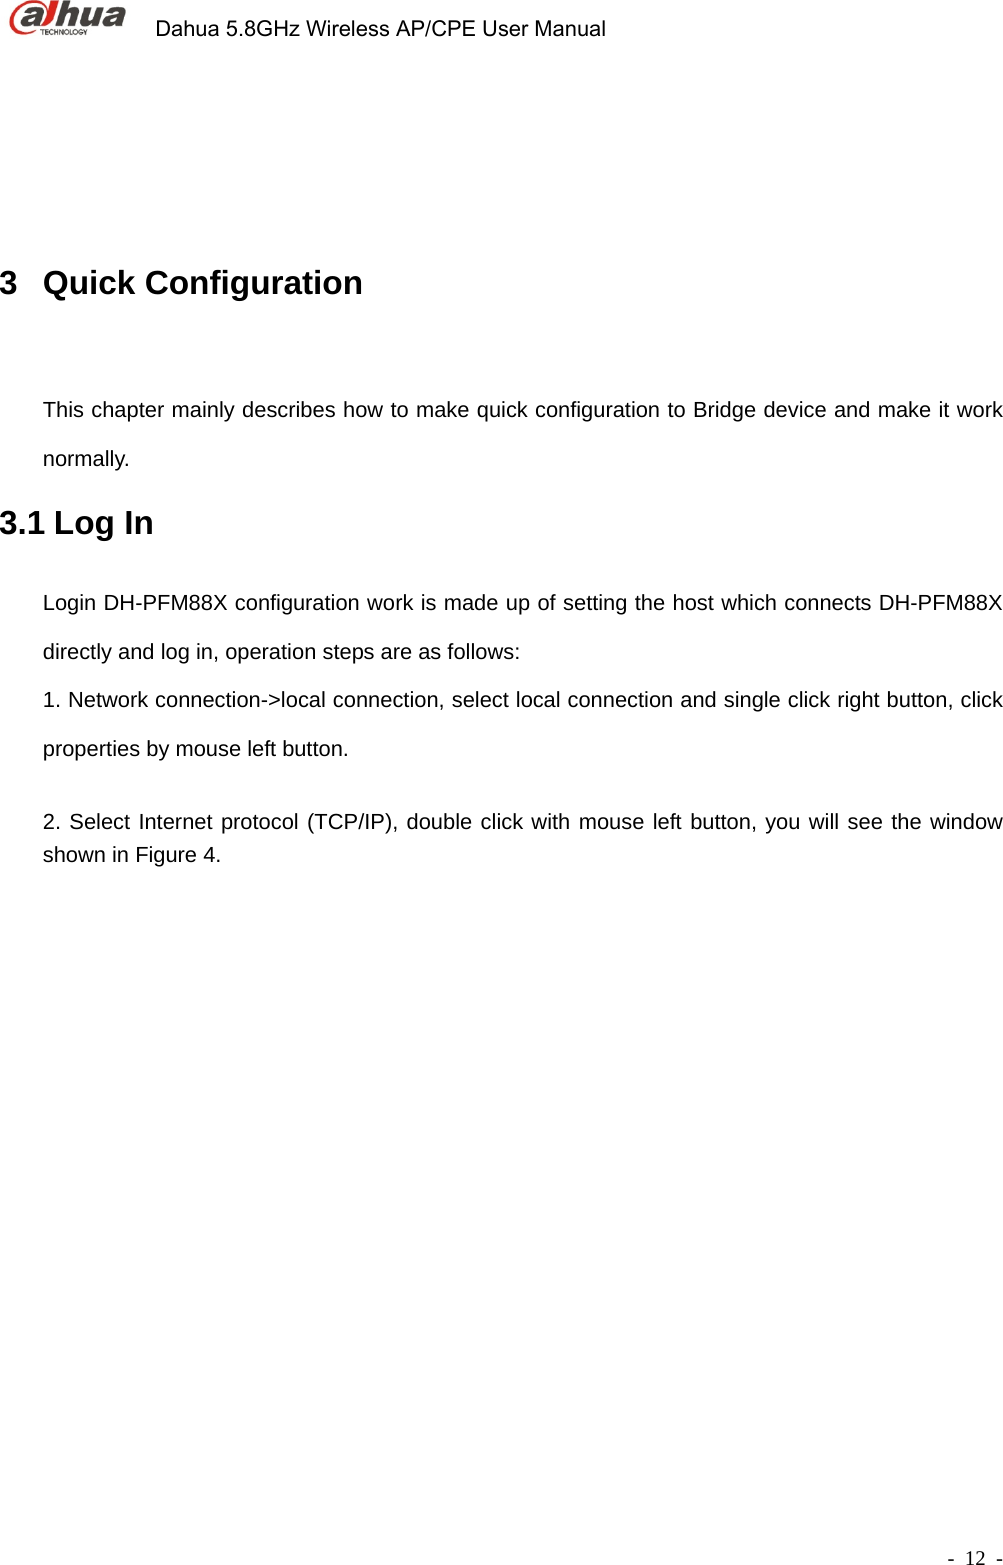             Dahua 5.8GHz Wireless AP/CPE User Manual        - 12 - 3 Quick Configuration  This chapter mainly describes how to make quick configuration to Bridge device and make it work normally.  3.1 Log In   Login DH-PFM88X configuration work is made up of setting the host which connects DH-PFM88X directly and log in, operation steps are as follows:       1. Network connection-&gt;local connection, select local connection and single click right button, click properties by mouse left button.    2. Select Internet protocol (TCP/IP), double click with mouse left button, you will see the window shown in Figure 4.    